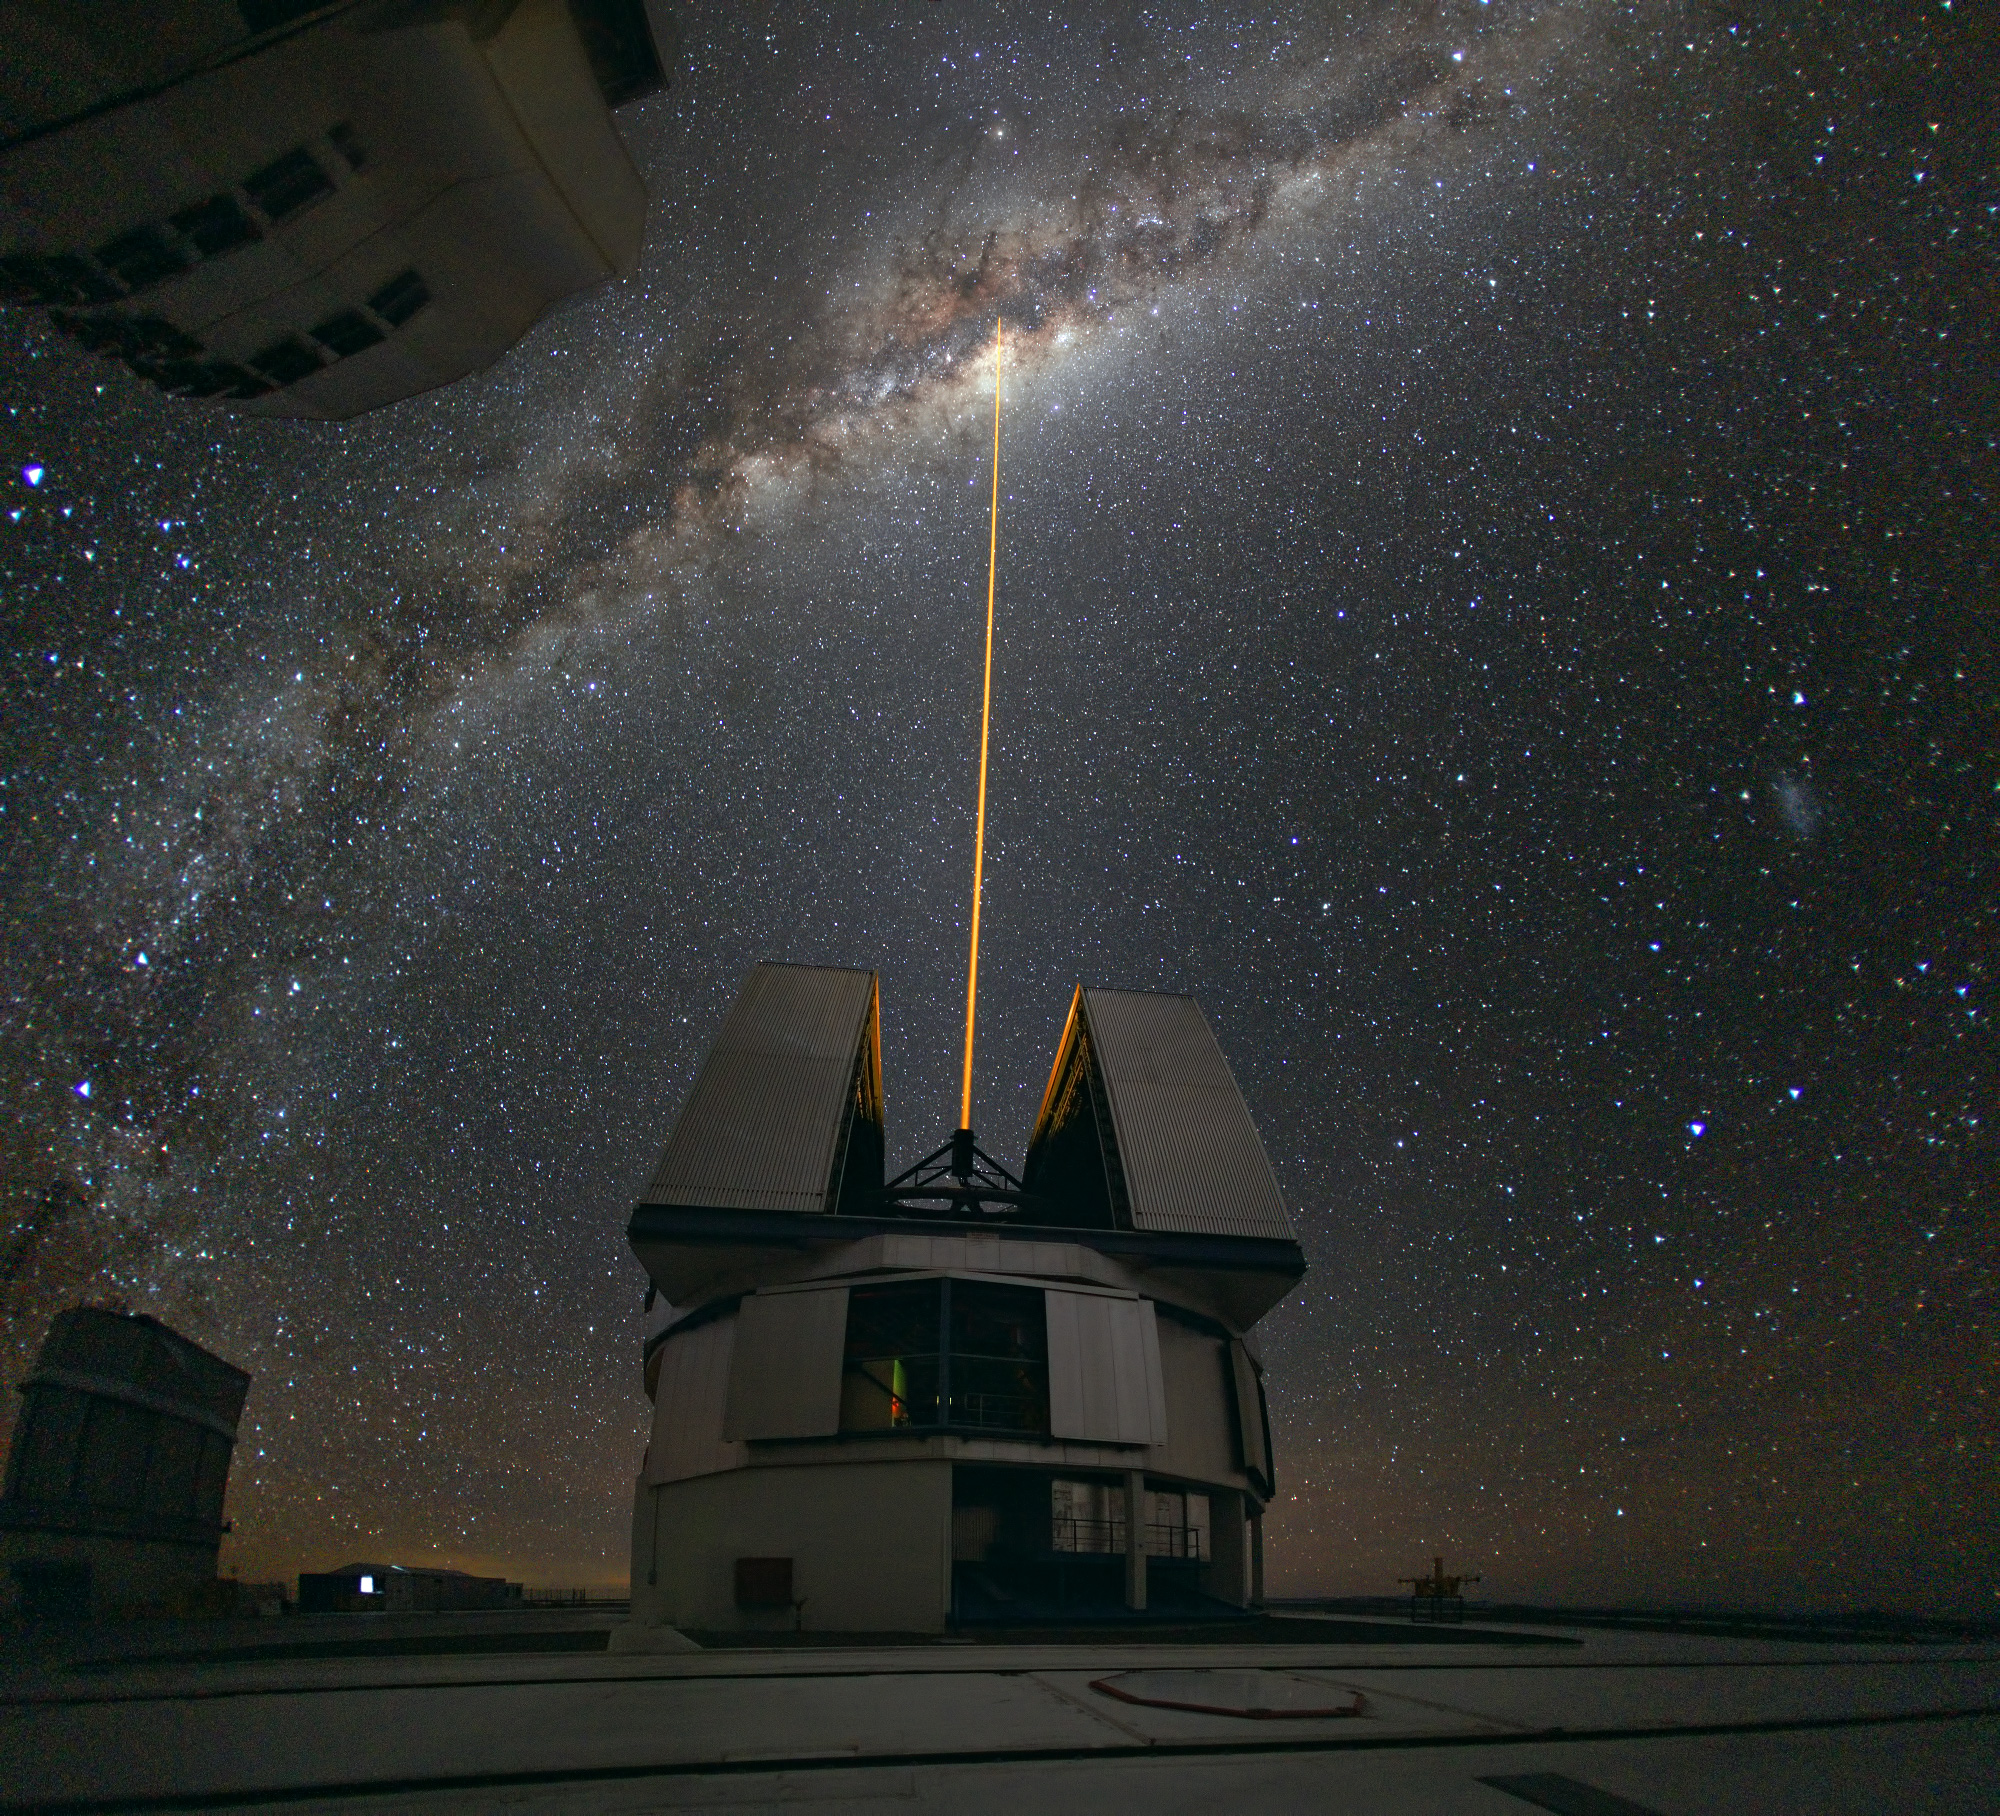 Very Large Telescope shooting a laser at the Milky Way